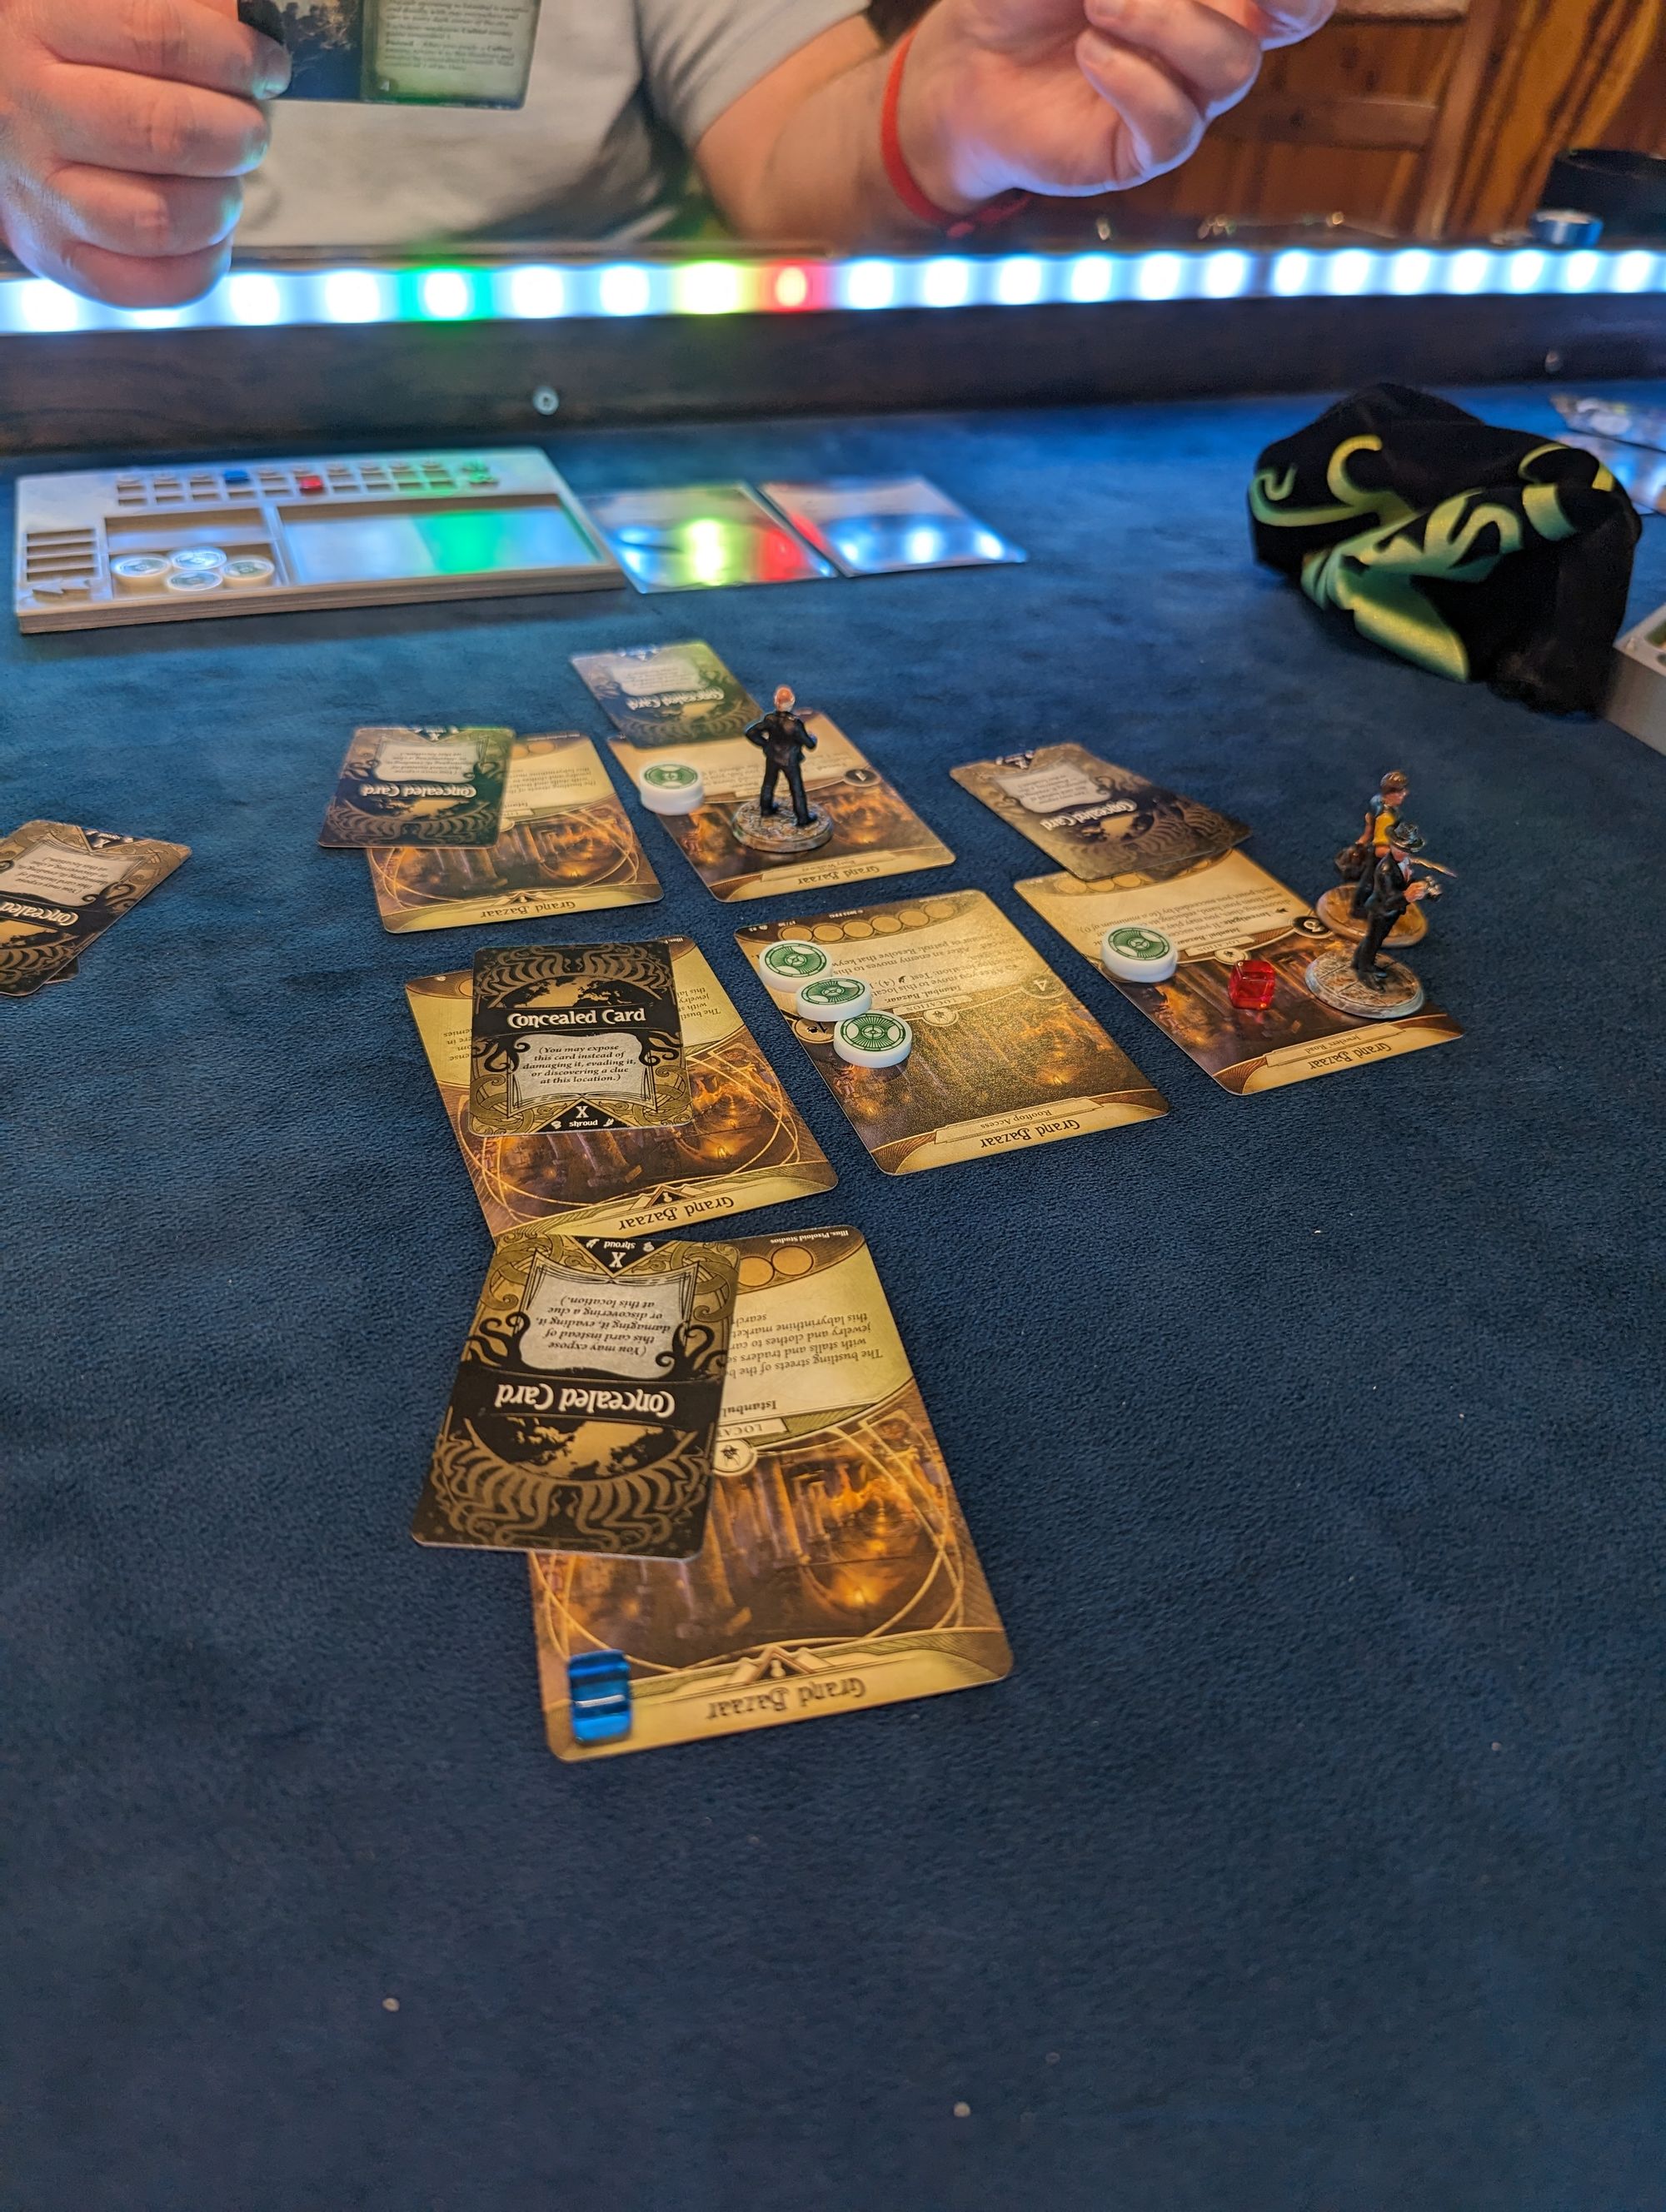 Unraveling Istanbul's Enigma: A Race Against Darkness in Arkham Horror: The Card Game